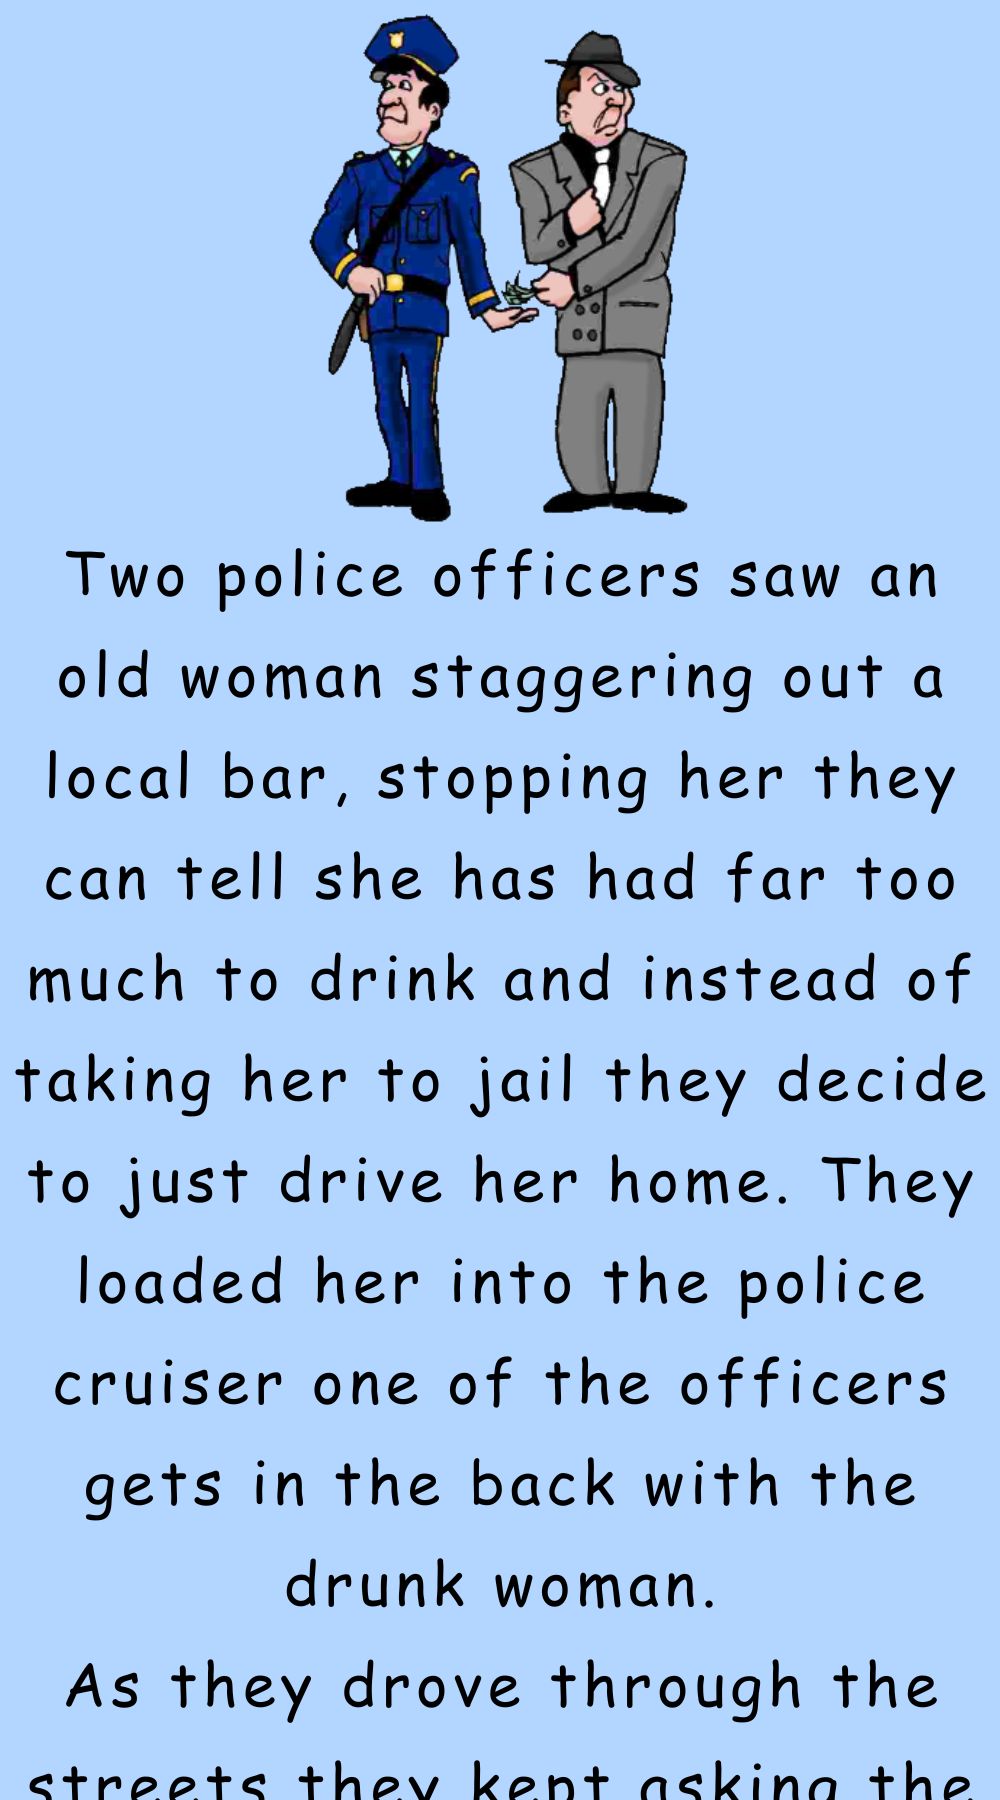 Two police officers saw an old woman staggering out a local bar